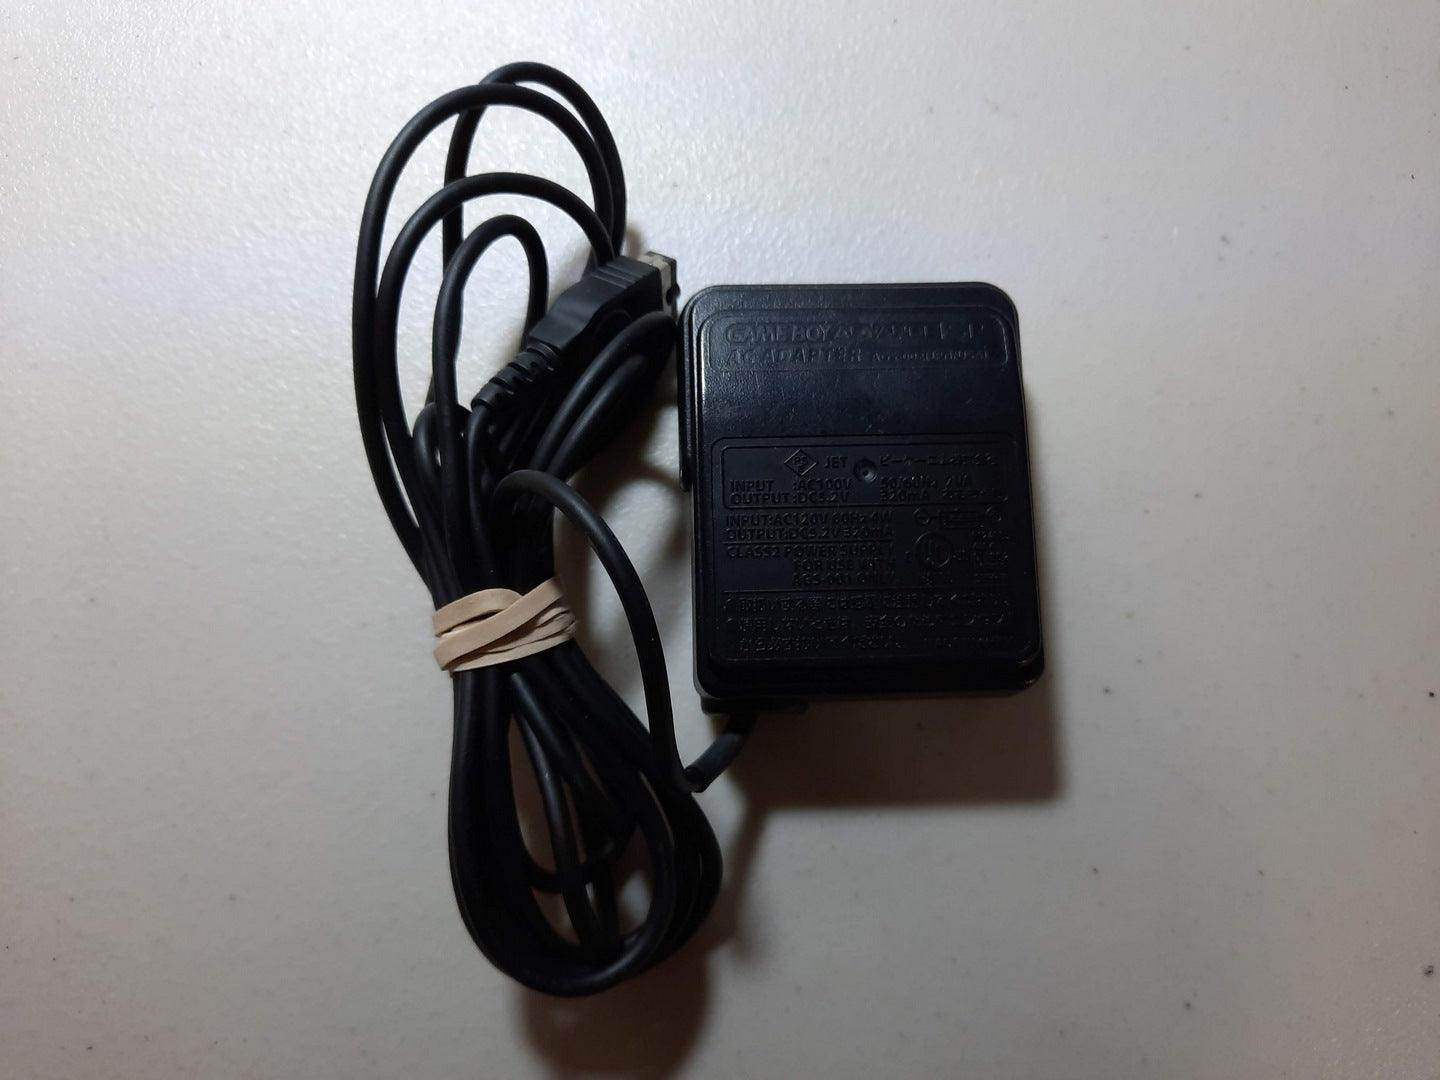 Original AC Adapter For Nintendo Gba Sp GameBoy Advance Sp -- Jeux Video Hobby 